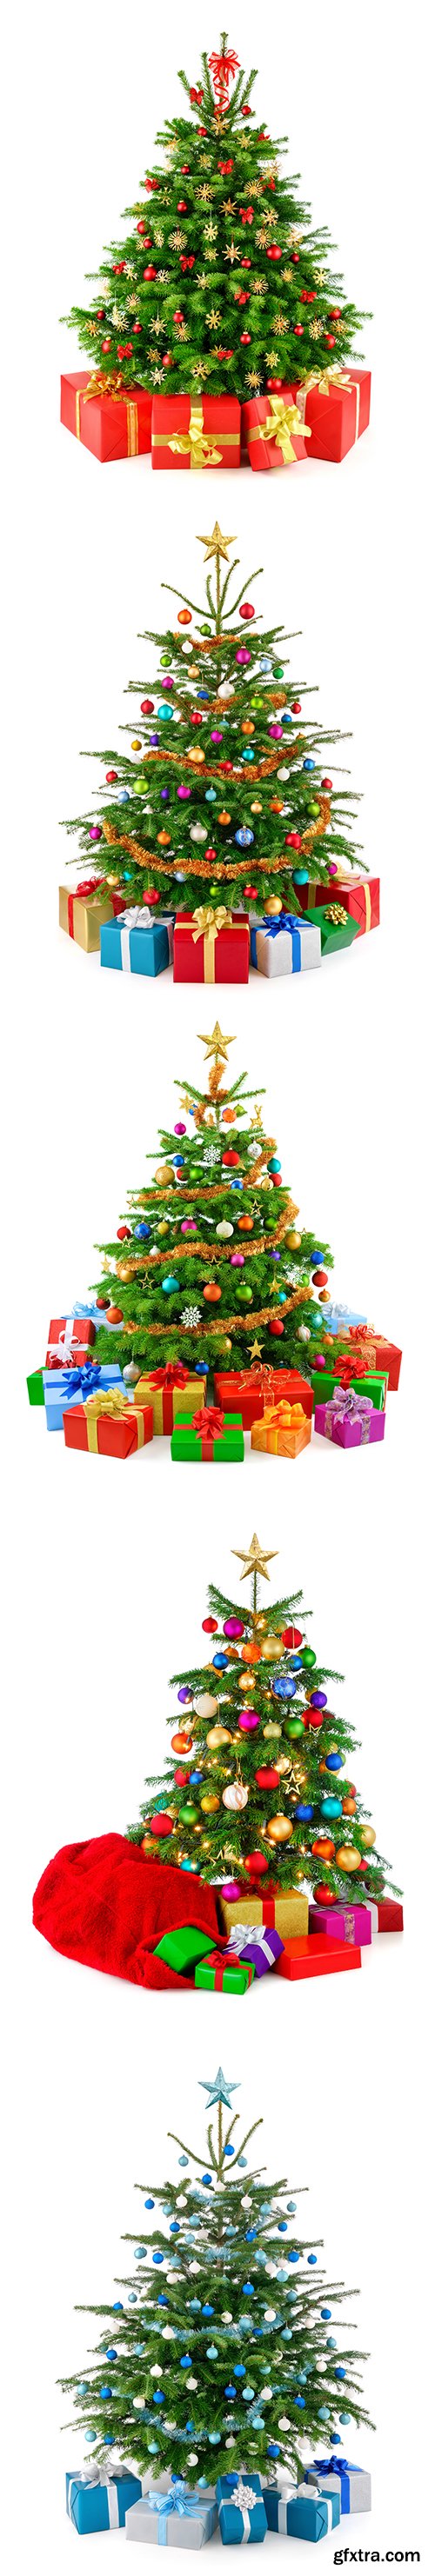 Christmas Tree With Gift Box Isolated - 10xJPGs